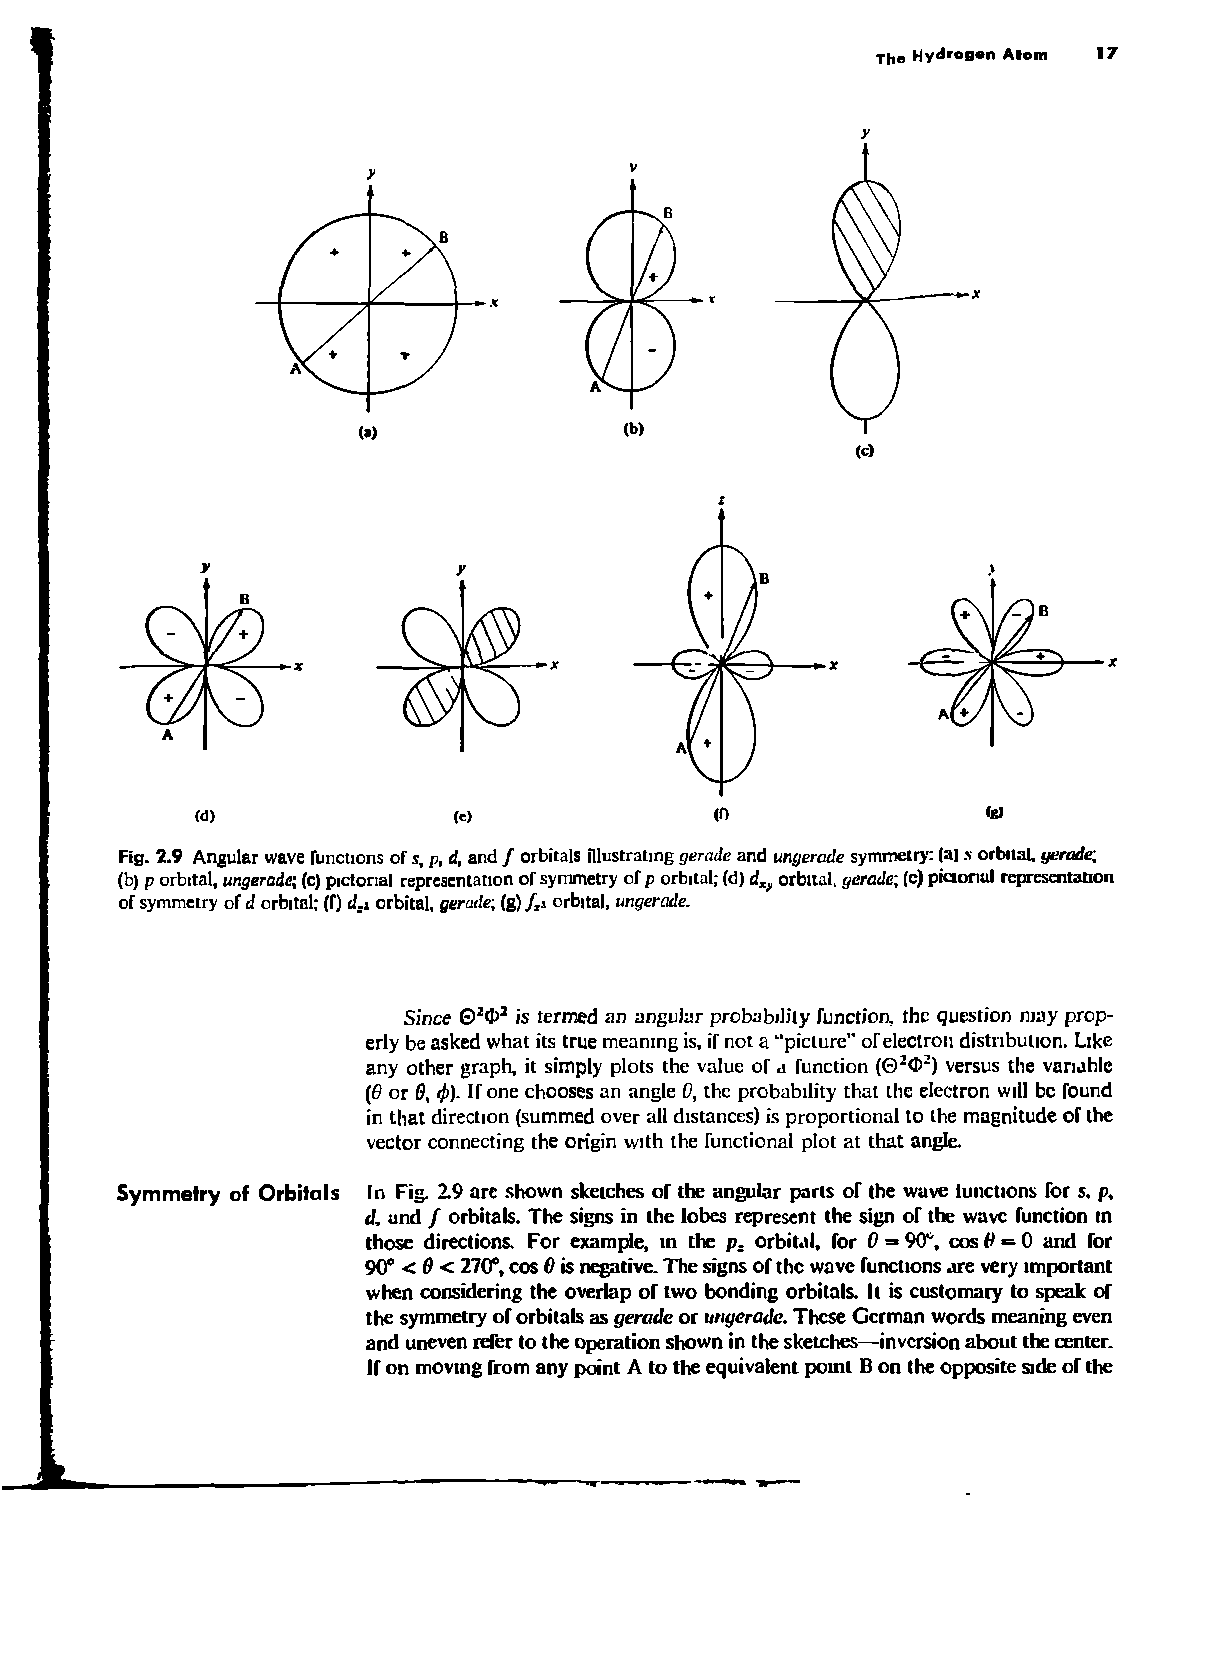 Fig. 2.9 Angular wave functions of s, p, d, and / orbitals illustrating gerade and ungerode symmetry (a] s orbital, gerade, (b) p orbital, ungeradai (c) pictorial representation of symmetry of p orbital (d) dx> orbital, gerade (c) pictorial representation of symmetry of d orbital (f) d.i orbital, gerade (g) /,i orbital, ungerode.